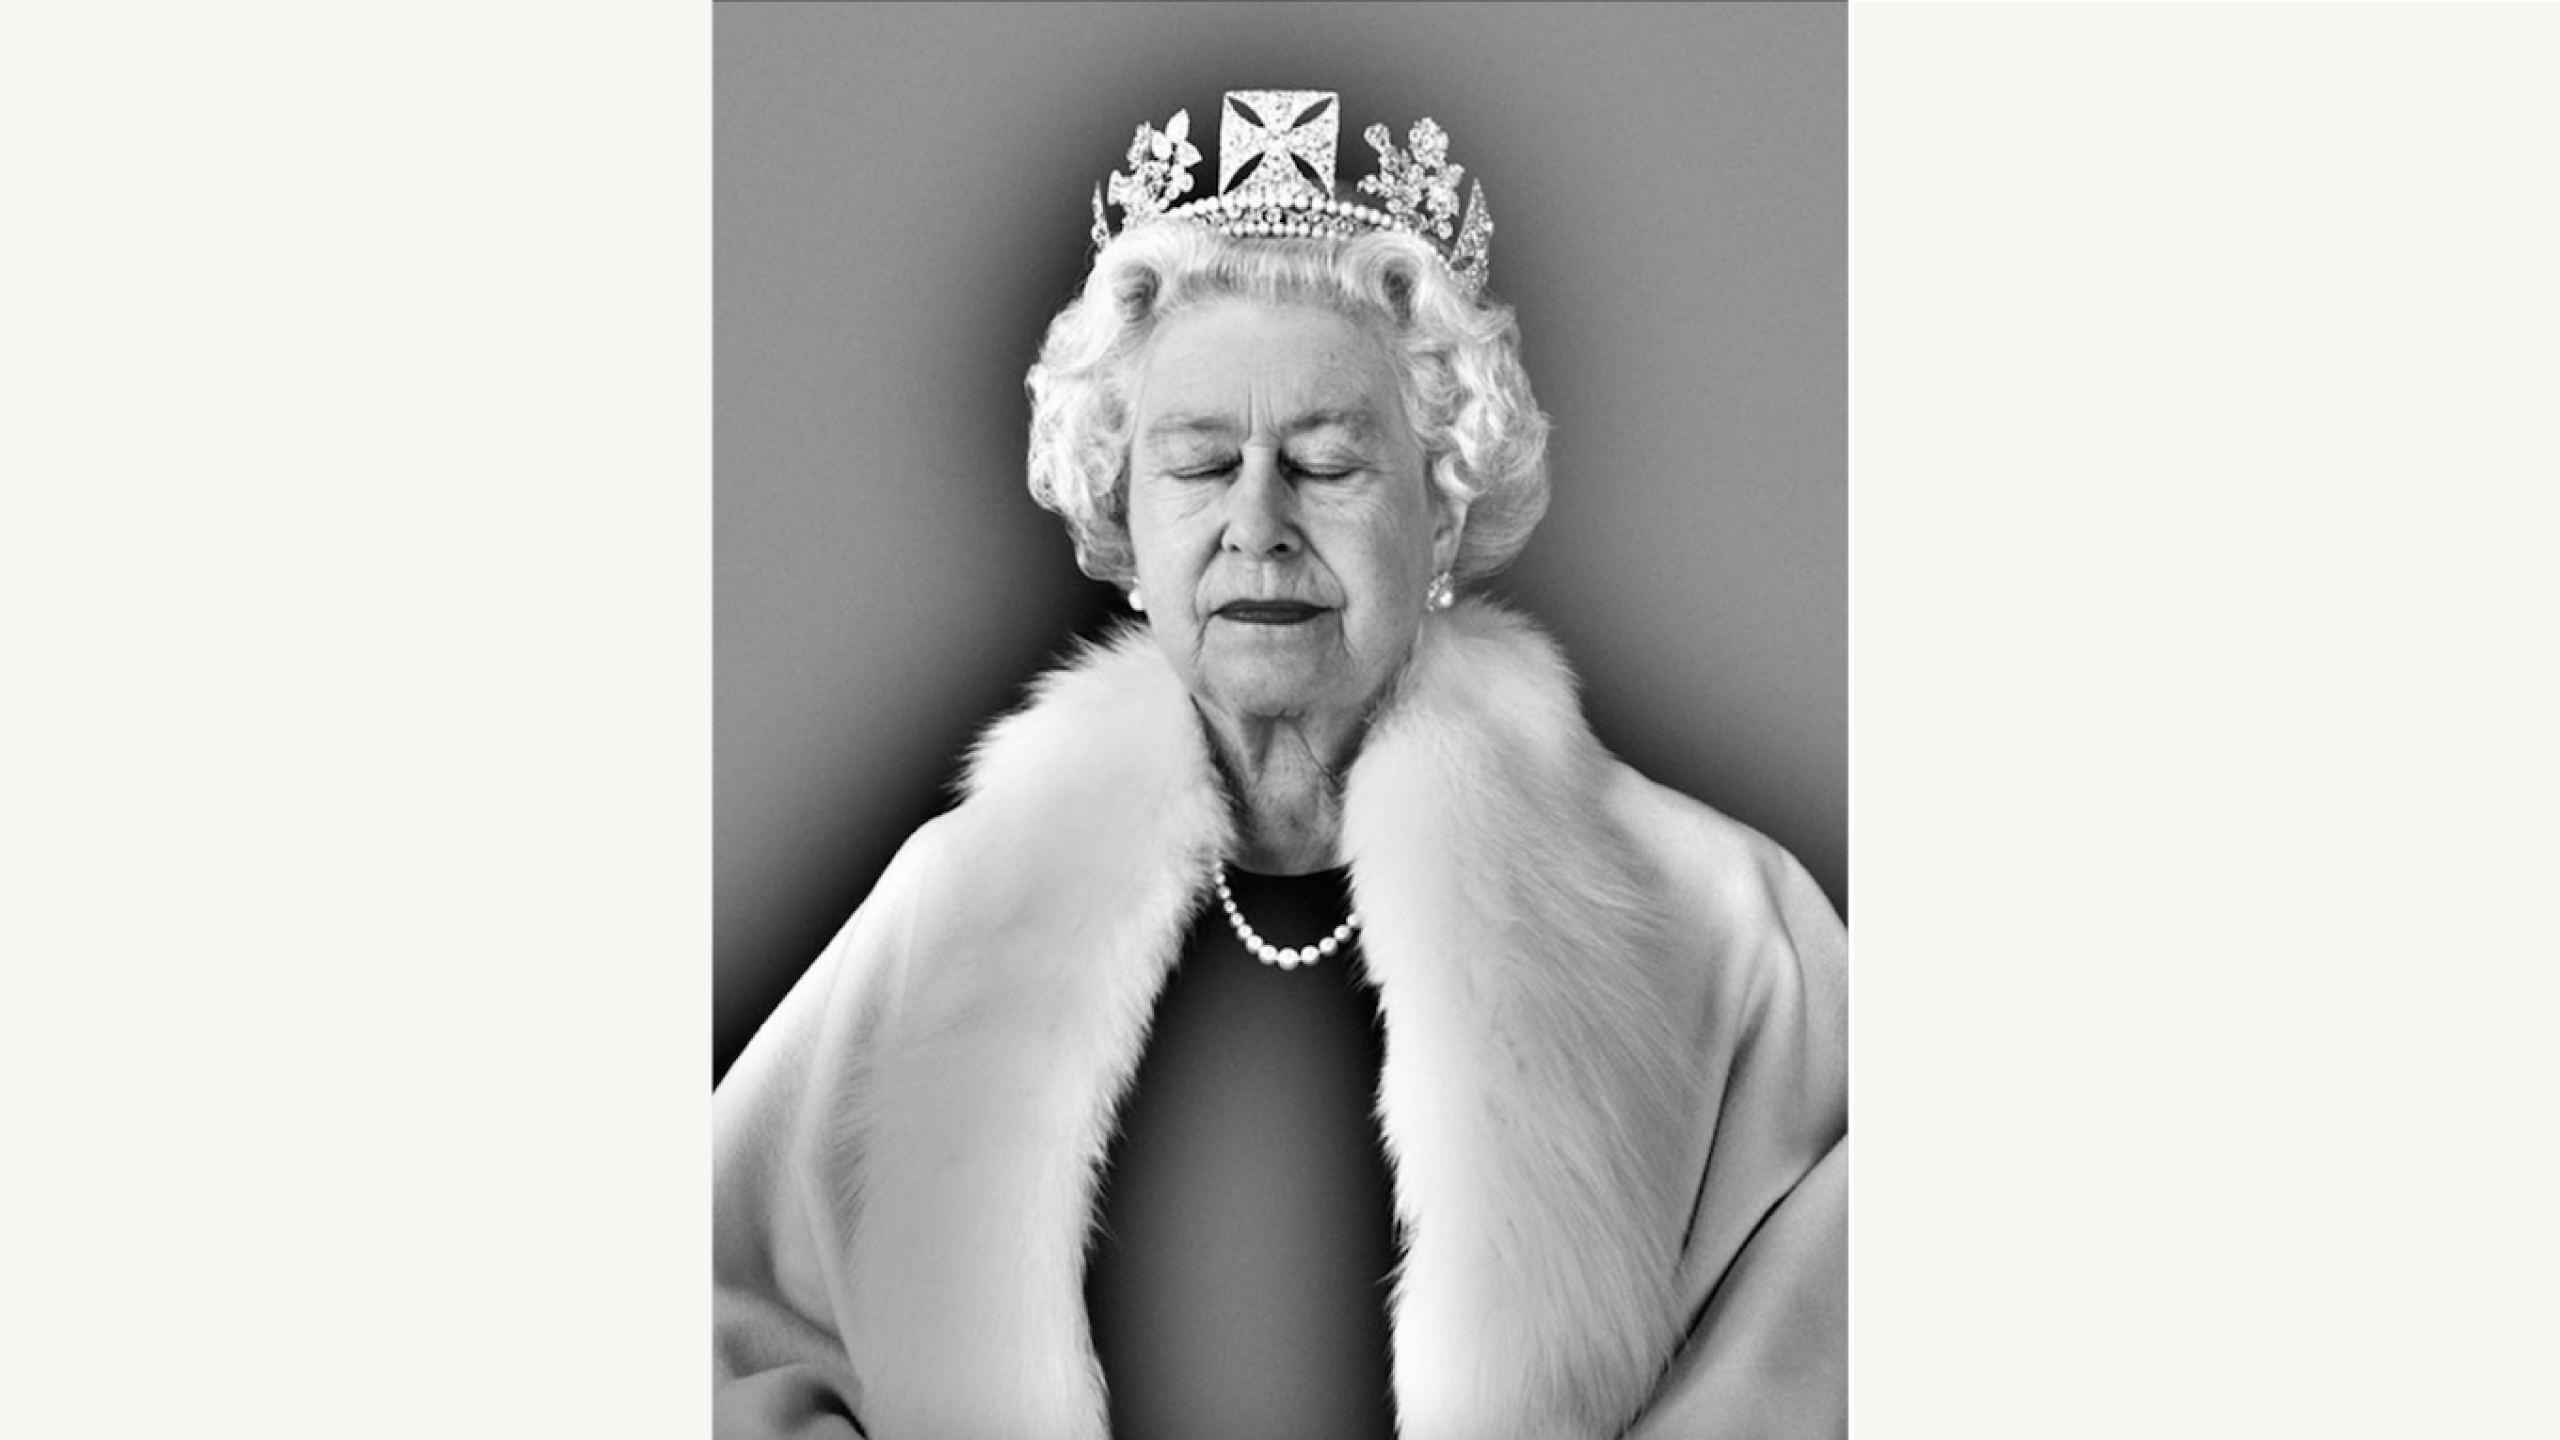 Reflections on the Death of Queen Elizabeth II